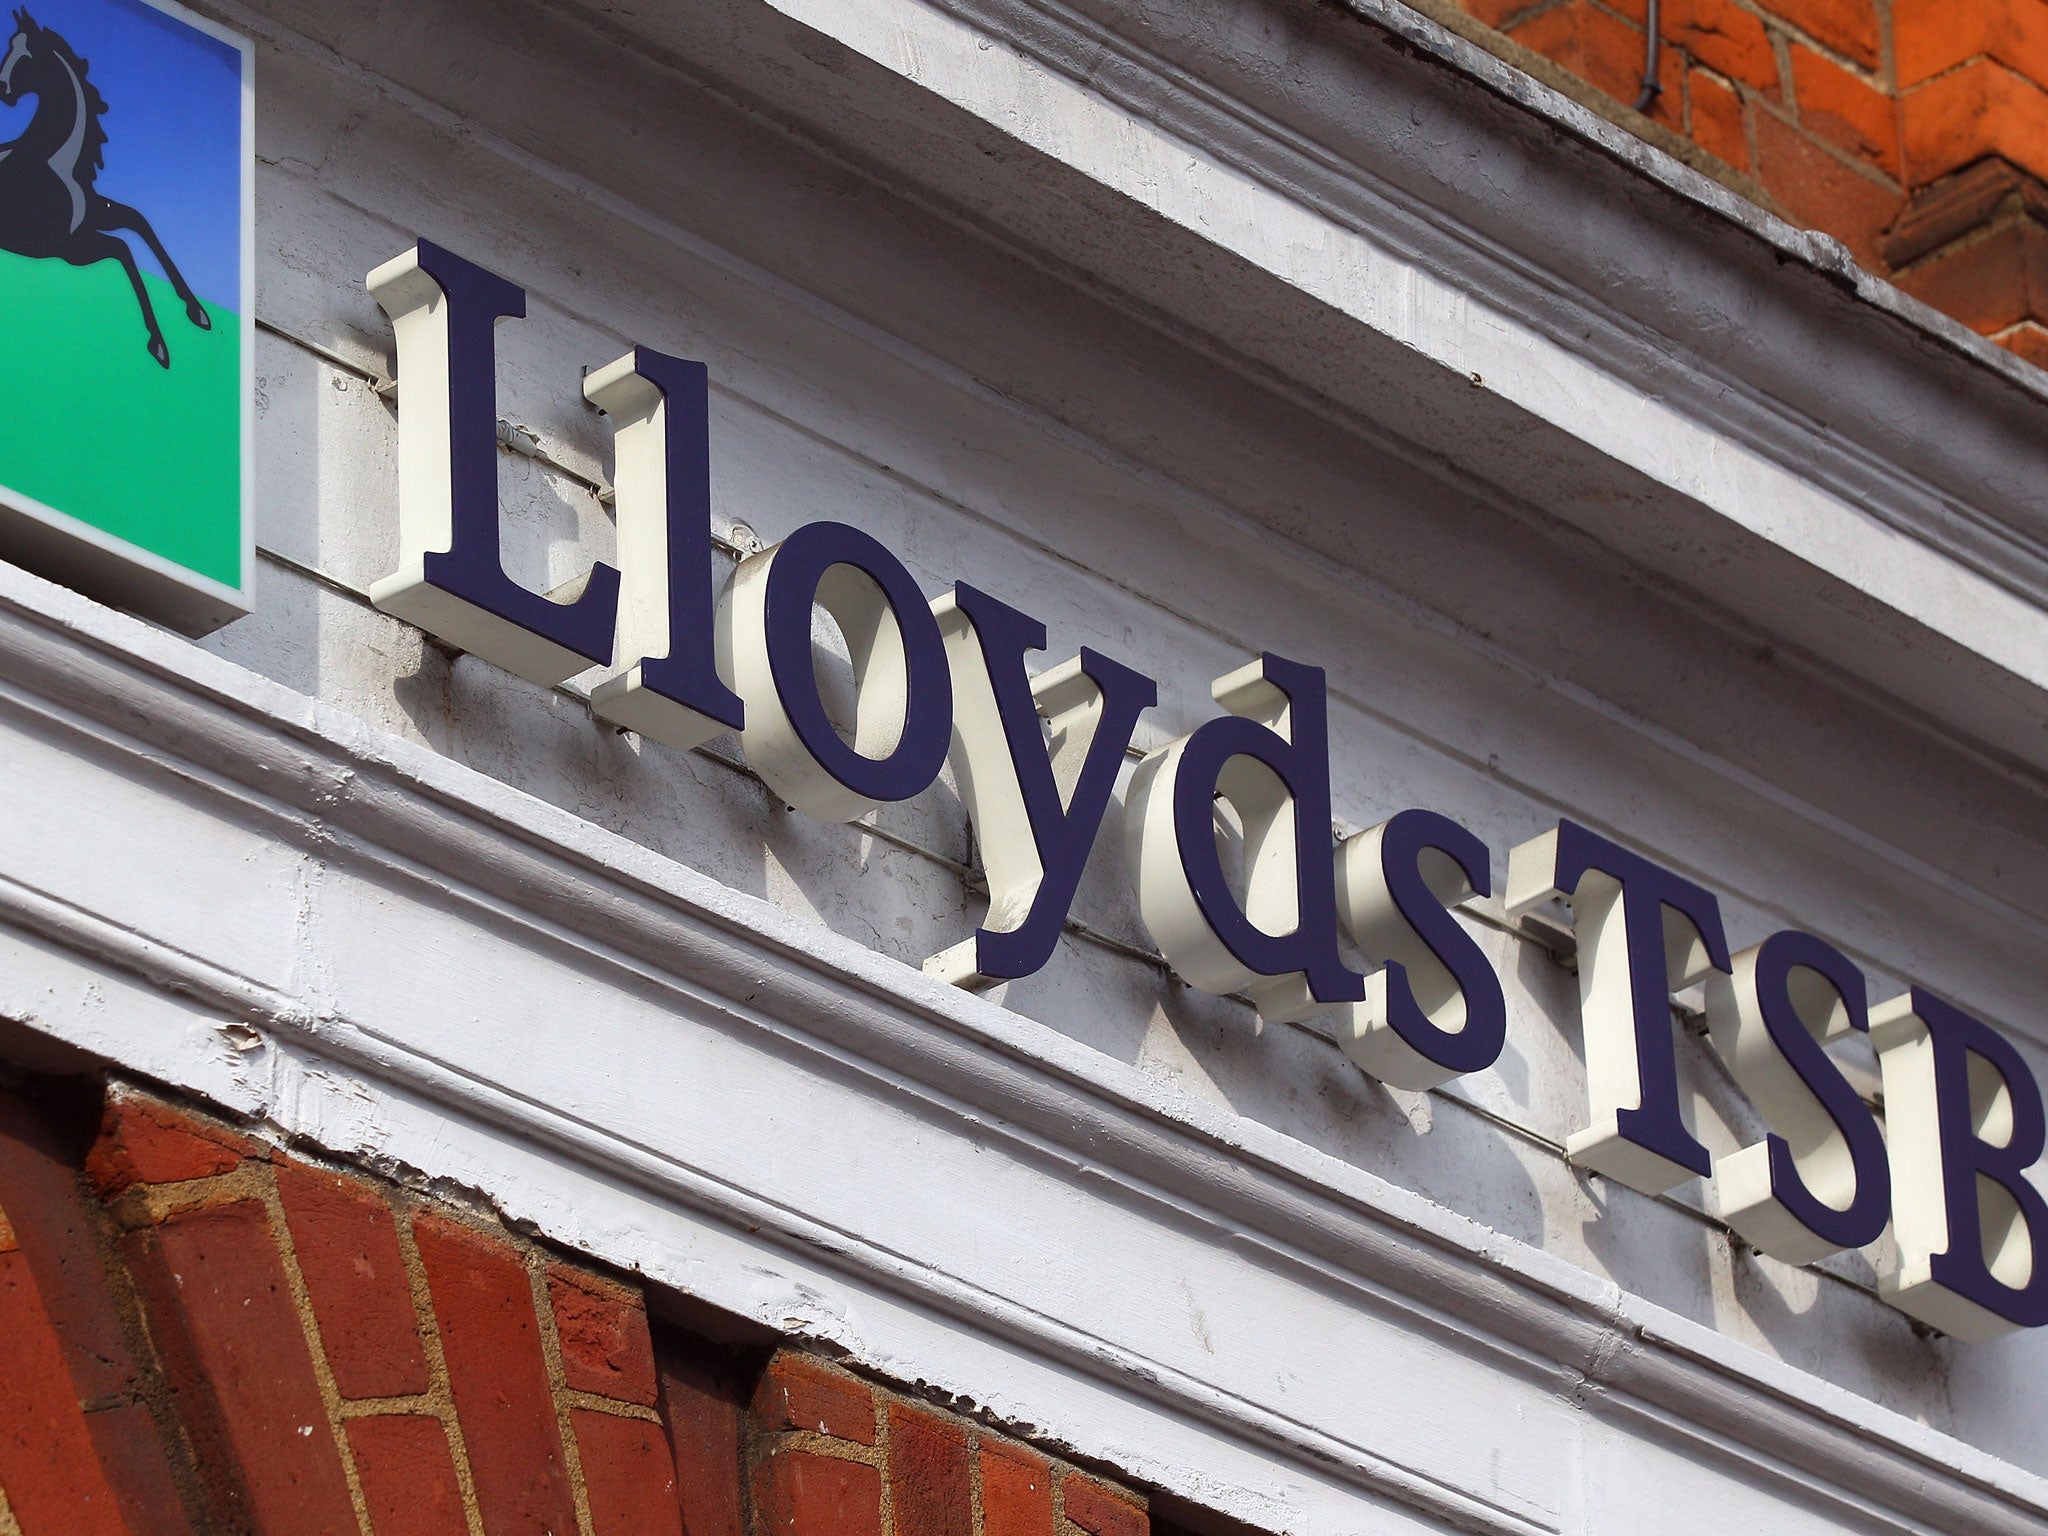 The government pumped £20bn into Lloyds to keep it afloat in 2008, leaving it with a 41% shareholding